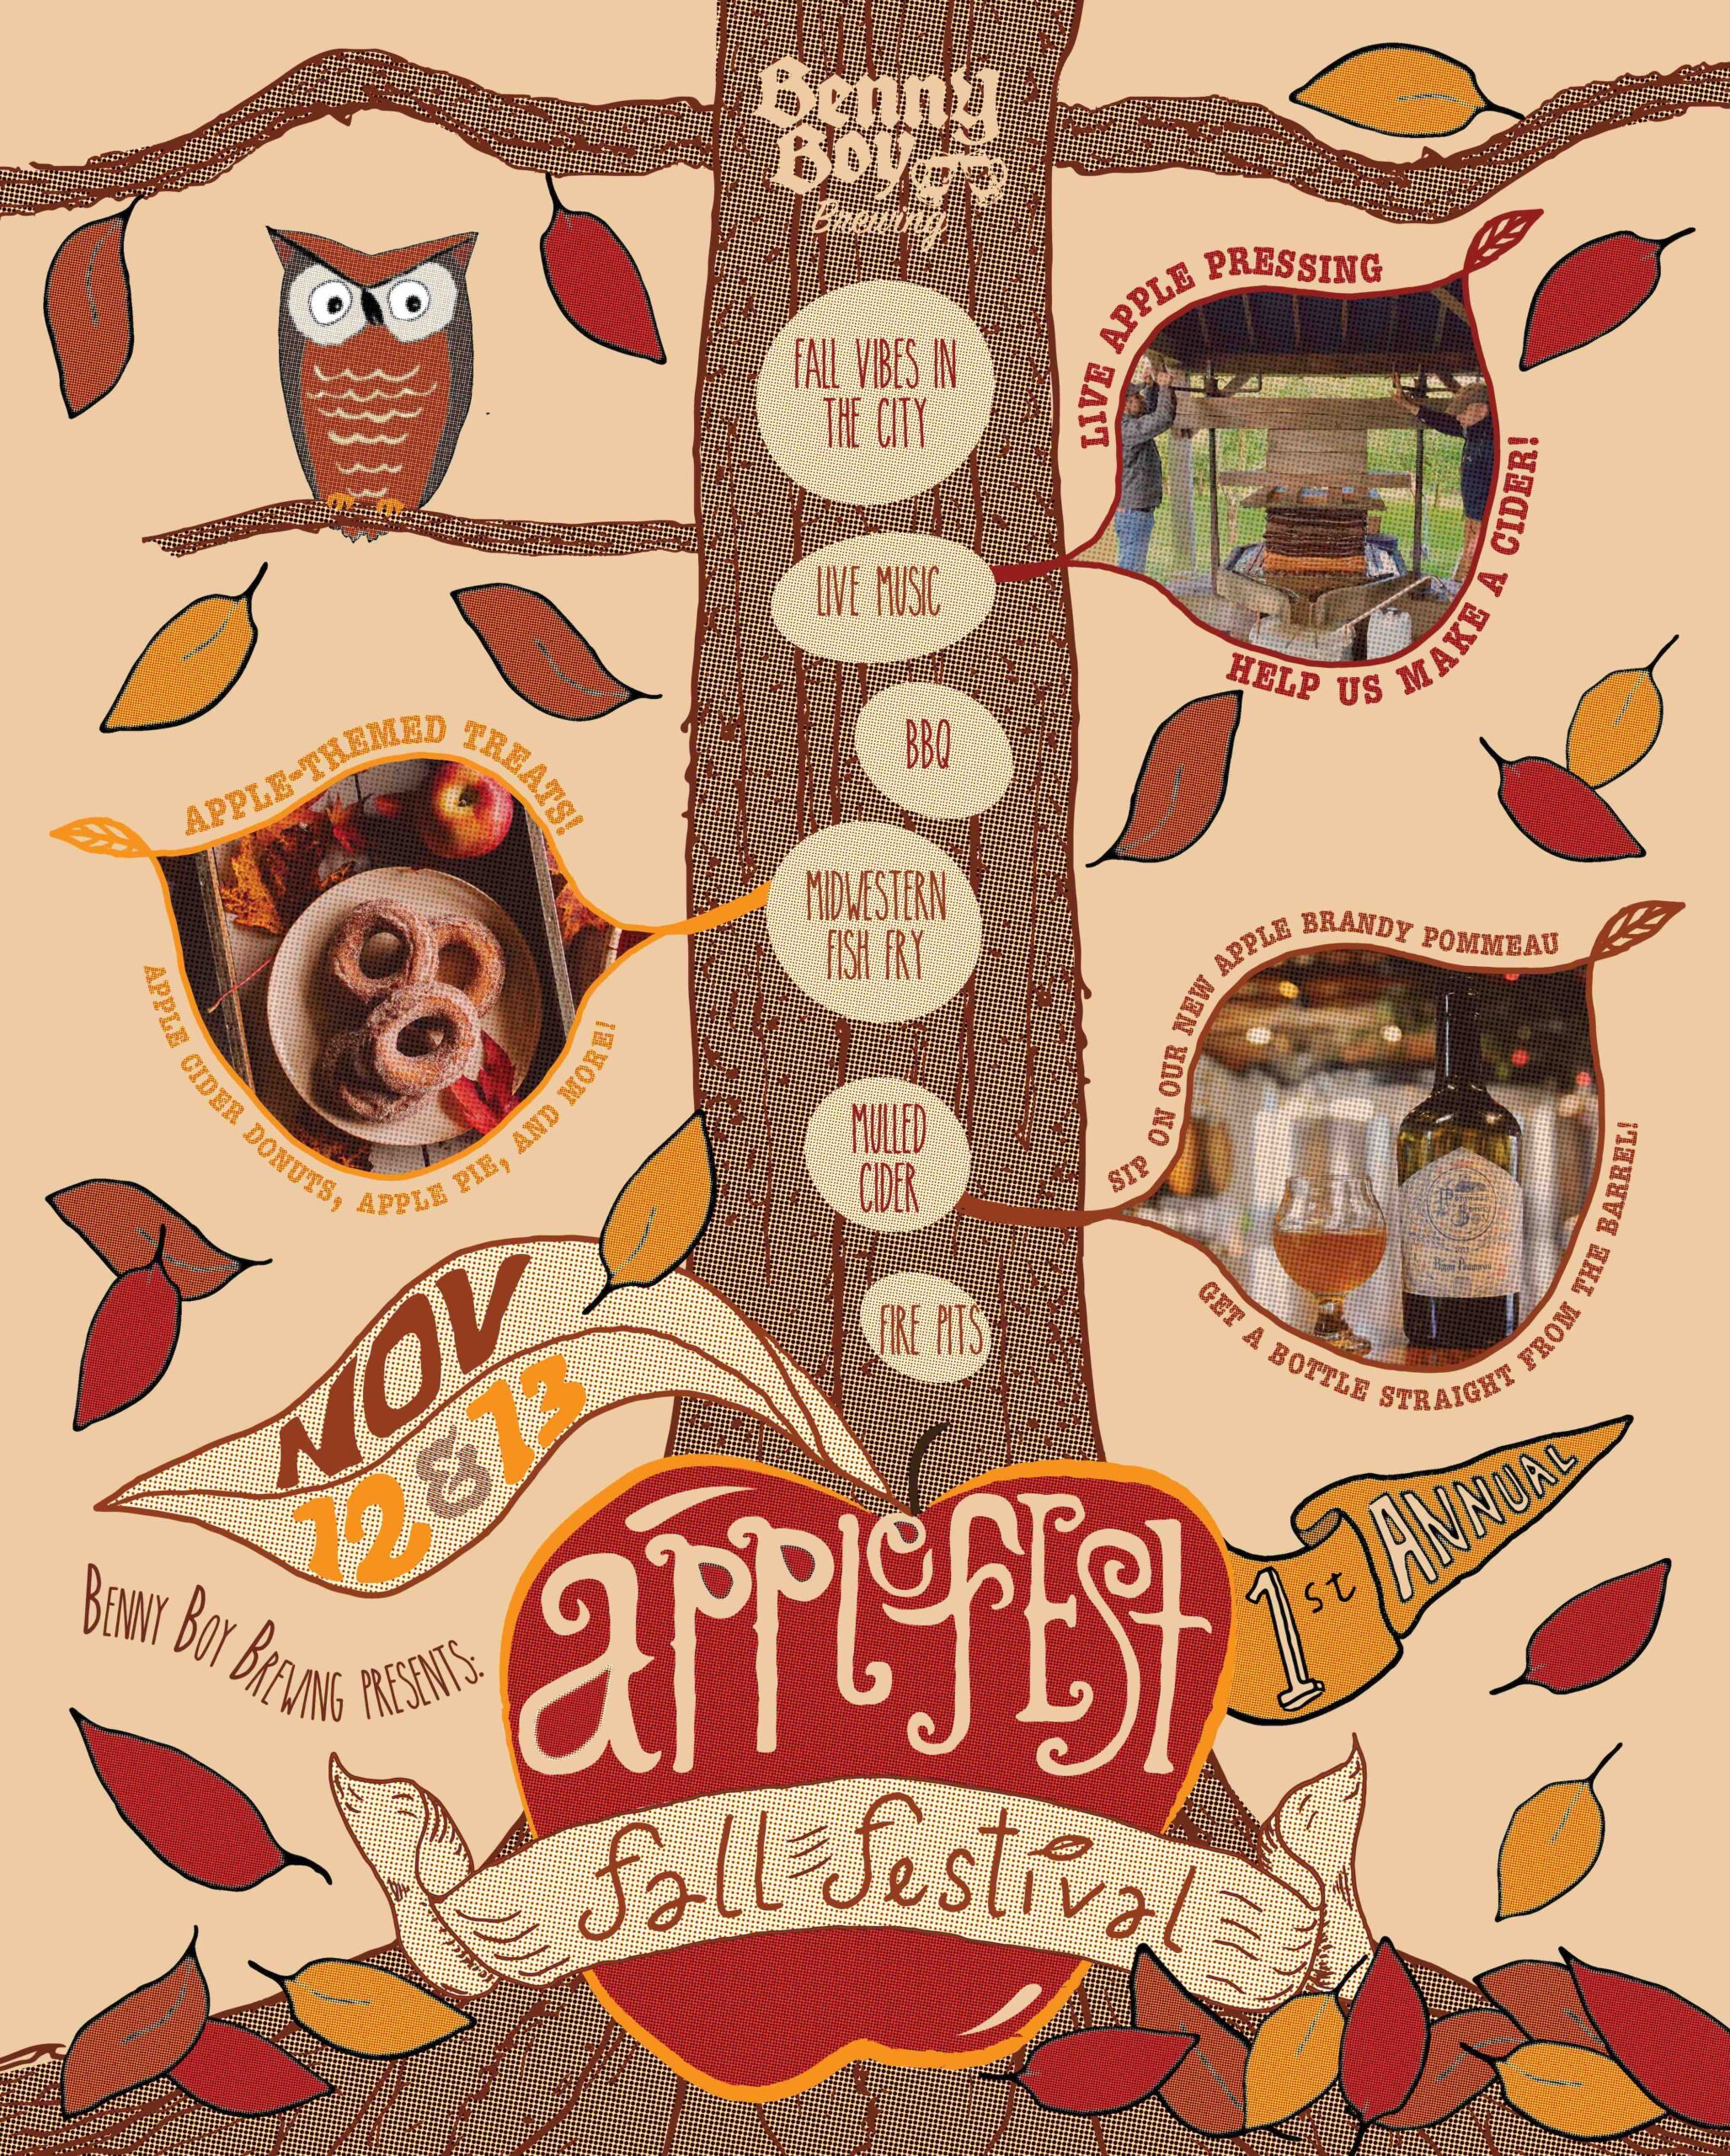 This weekend Benny Boy Brewing is hosting an AppleFest Fall Festival in honor of apples and autumn in the city.